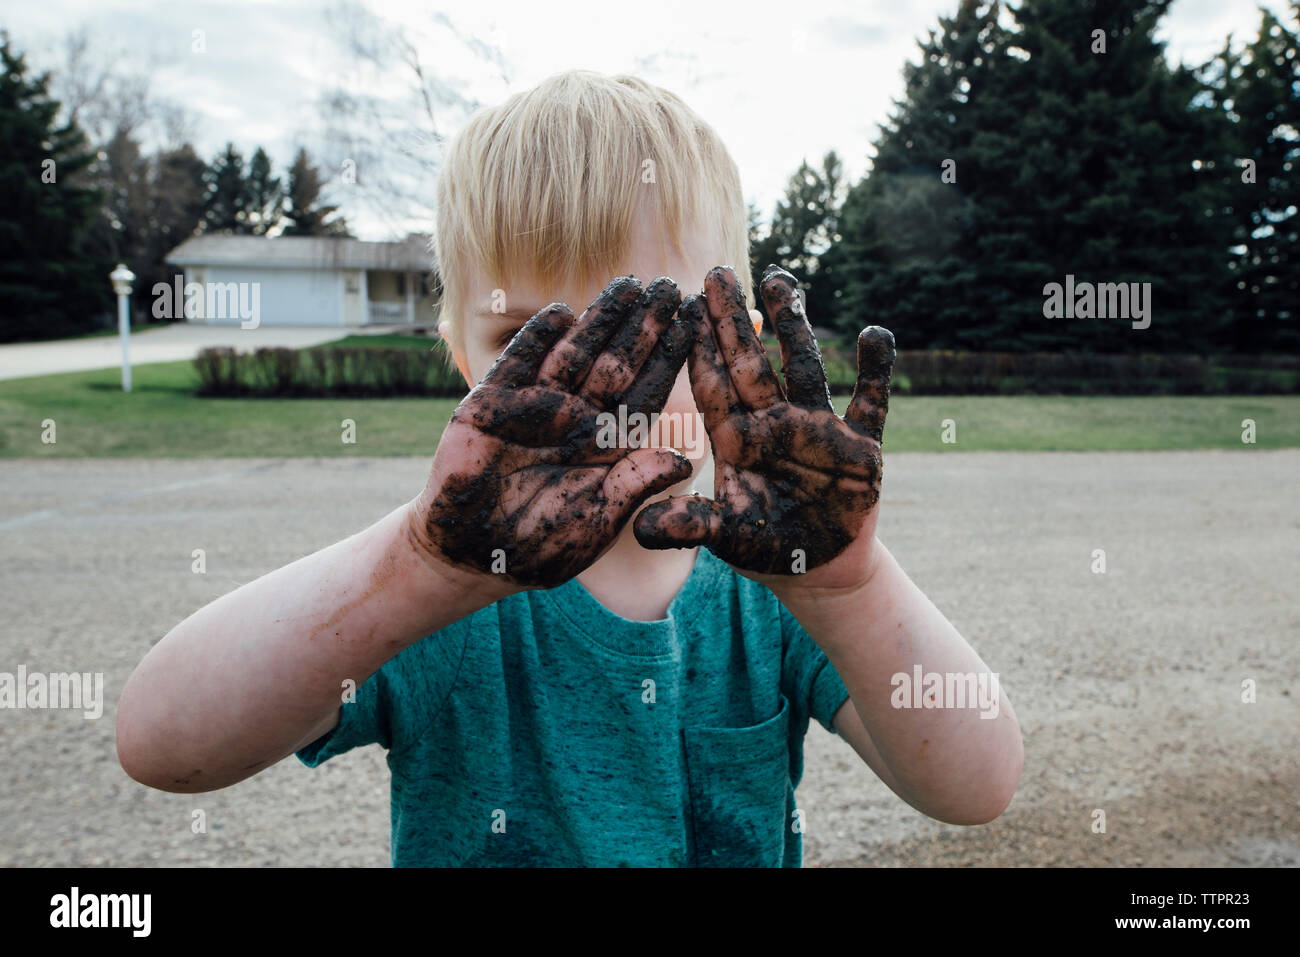 Boy with dirty hands standing on road Stock Photo